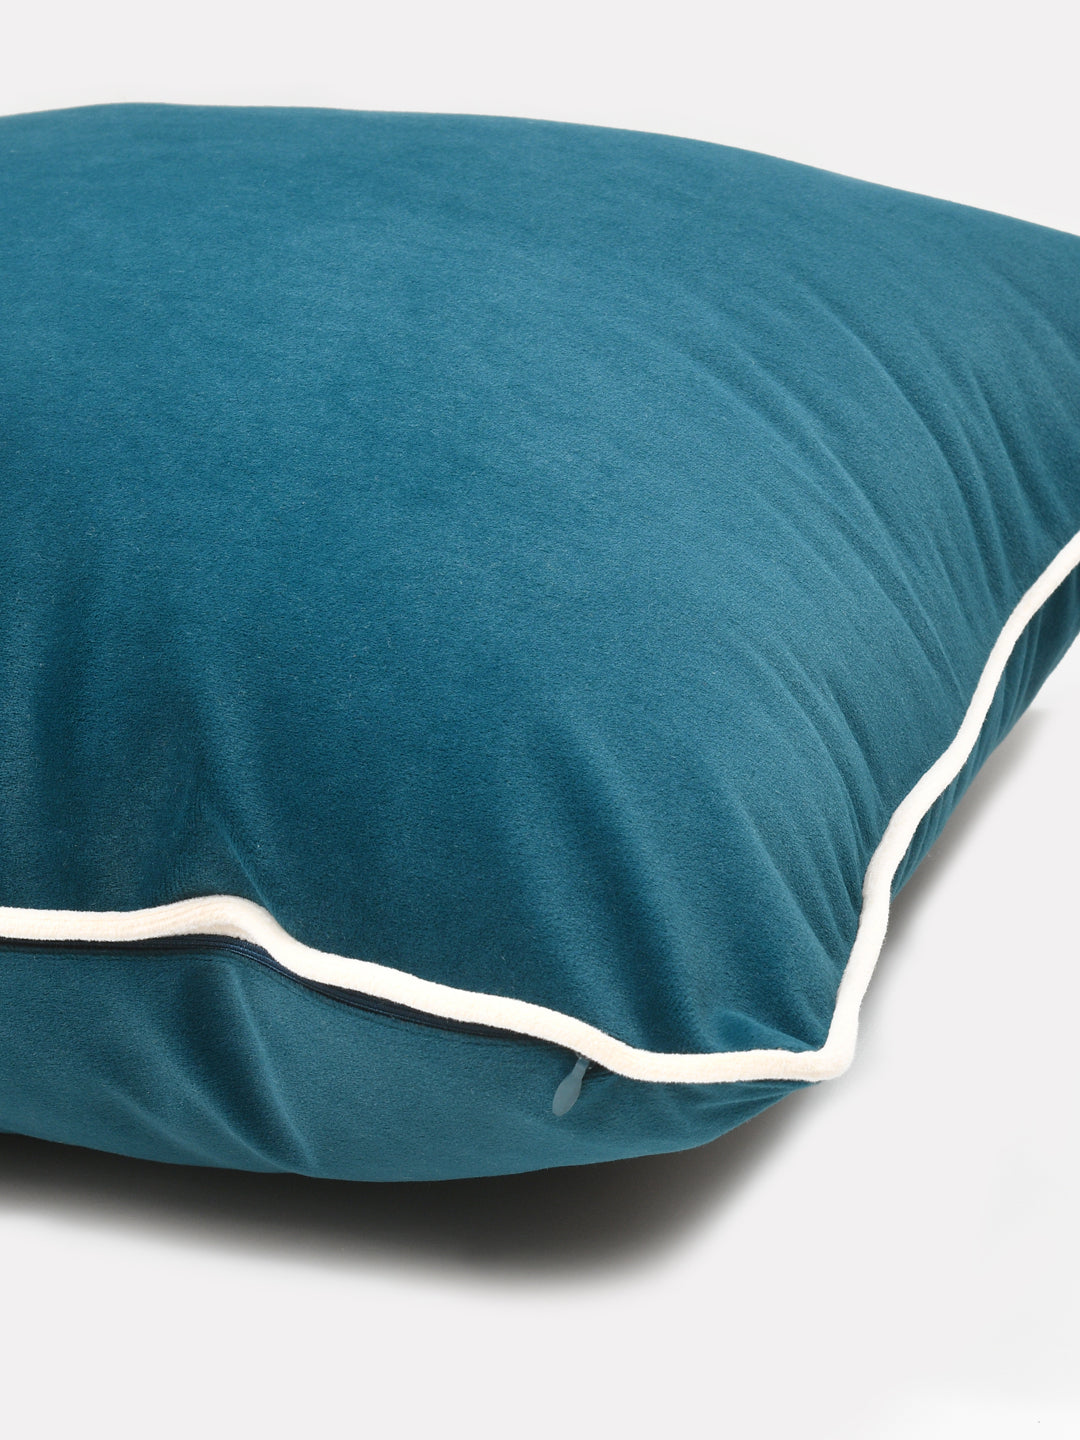 Velvet Cushion Covers; Set of 3; Teal With White Piping